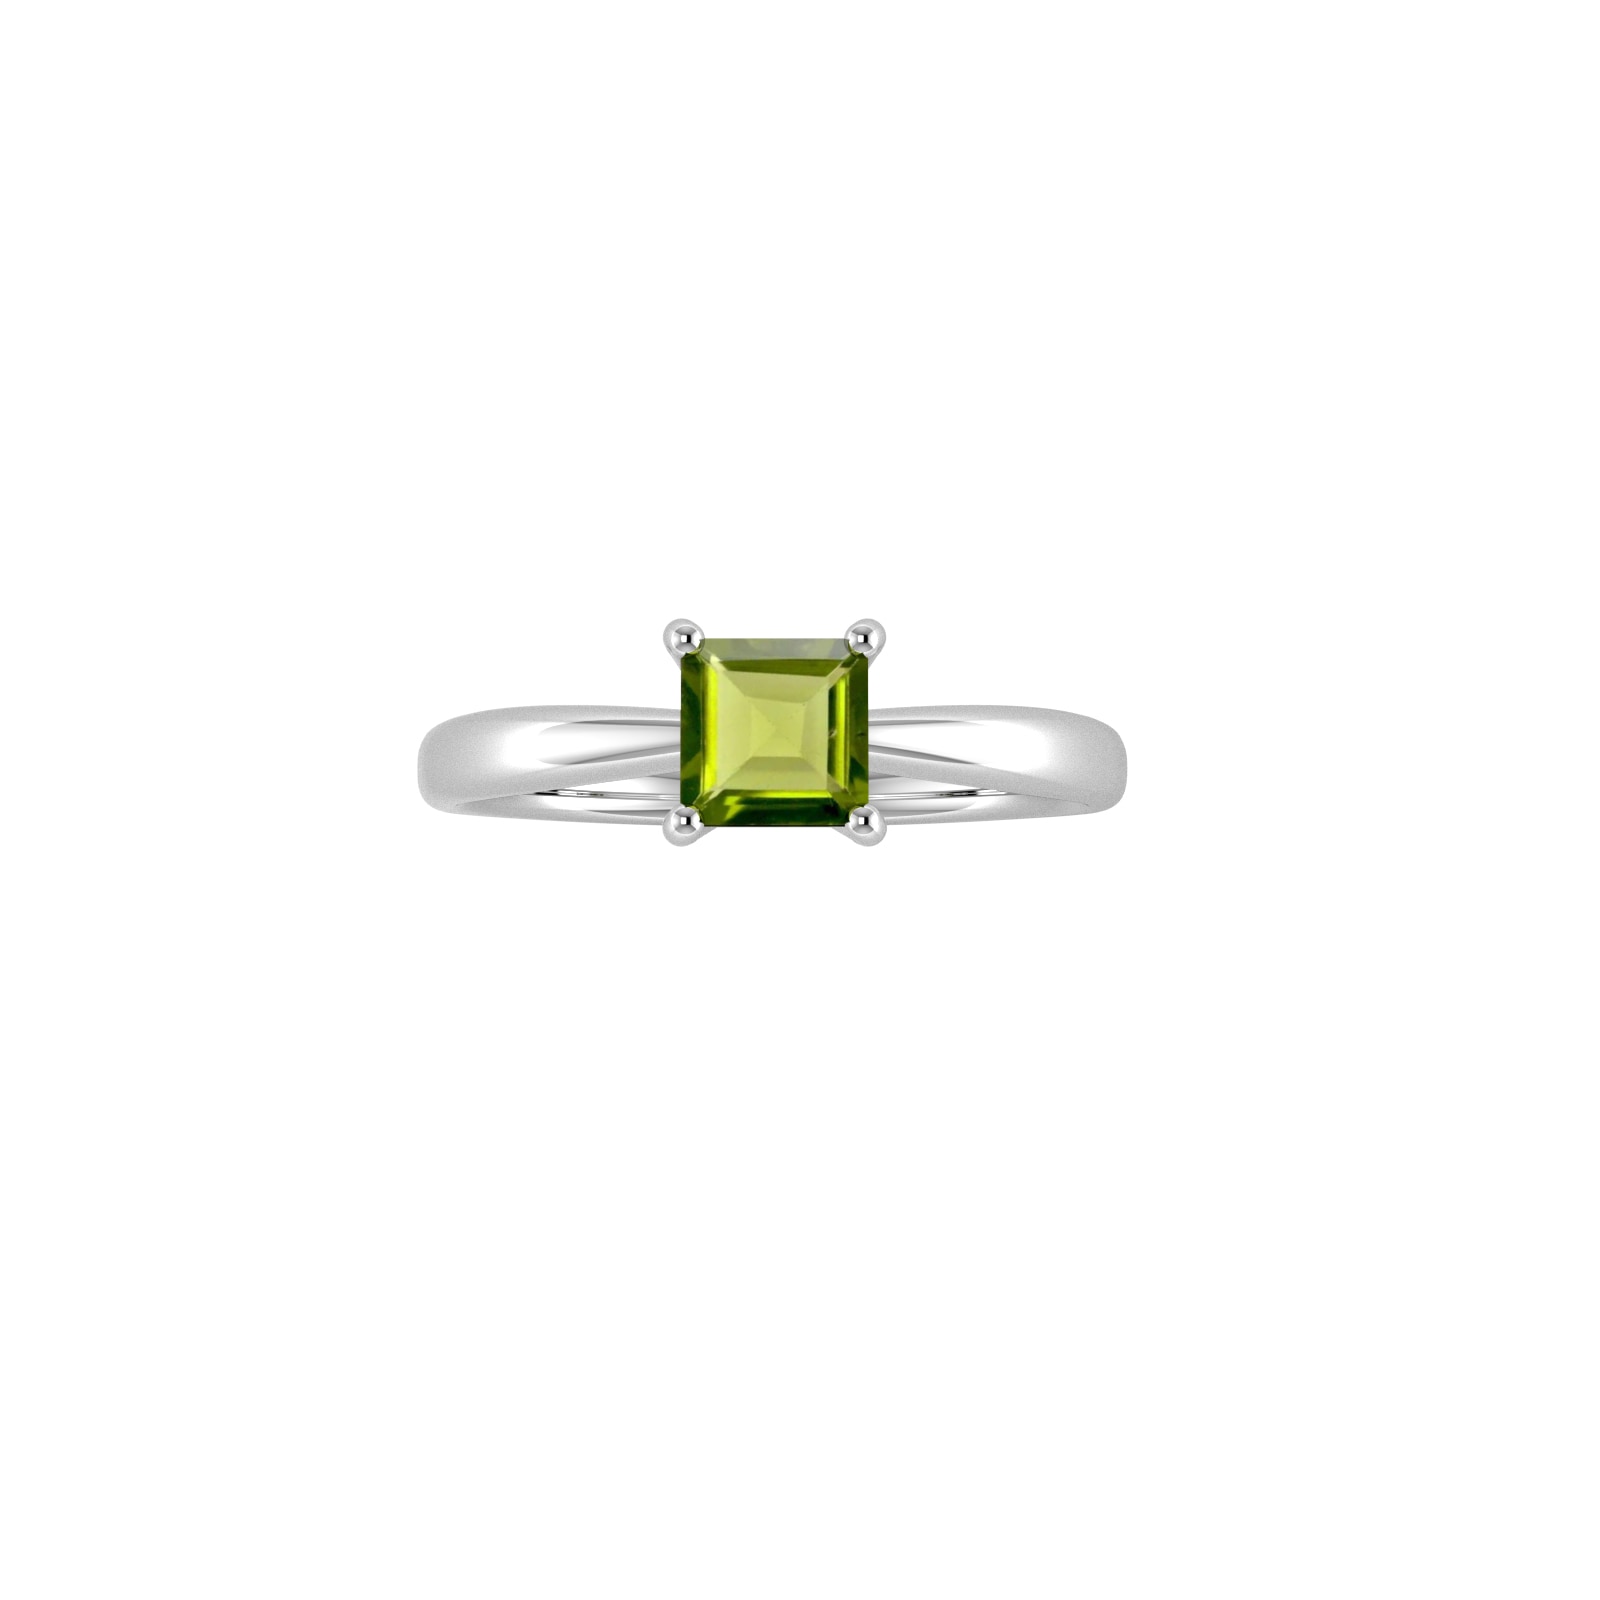 9ct White Gold 4 Claw Square Peridot 5mm x 5mm Ring- Ring Size L.5